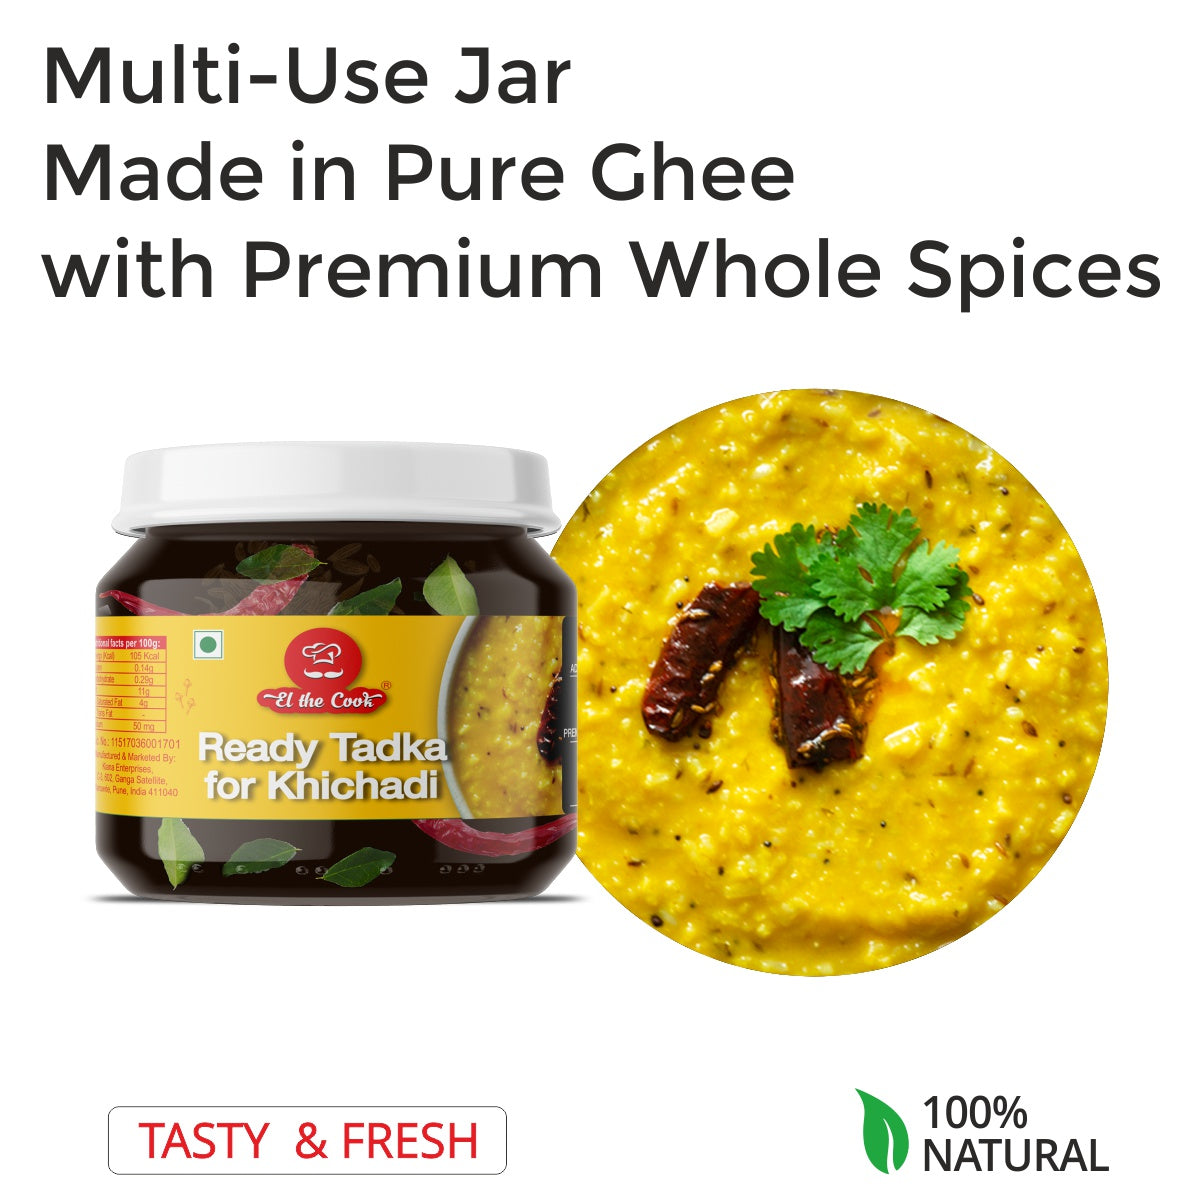 Indian Lunch Masala Combo, Super Saver 3 Pack, 3 x 180g